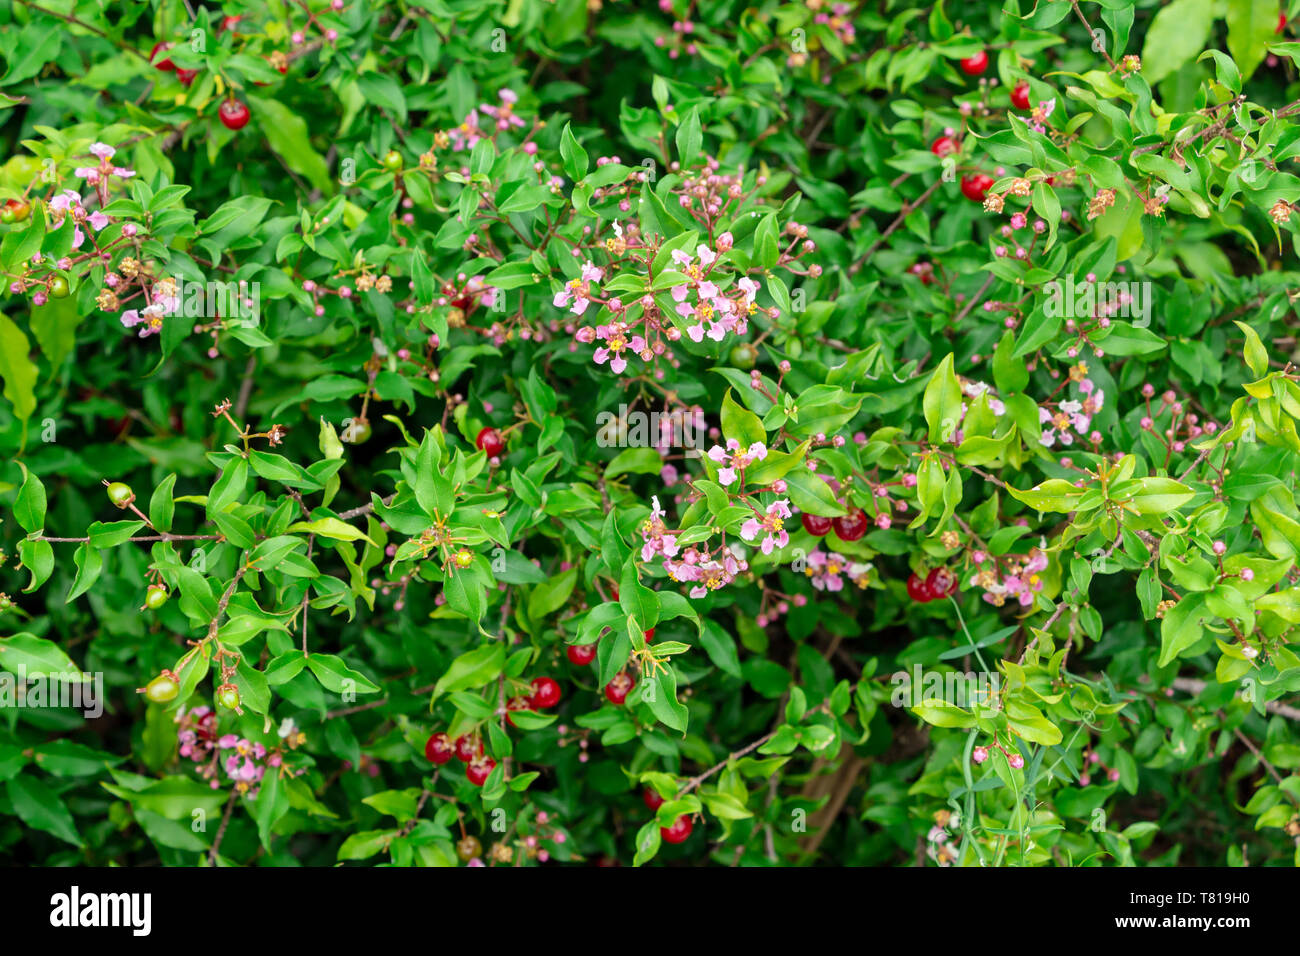 Barbados cherry a.k.a. wild crapemyrtle a.k.a. acerola (Malpighia glabra) with pink flowers and red berries - Davie, Florida, USA Stock Photo